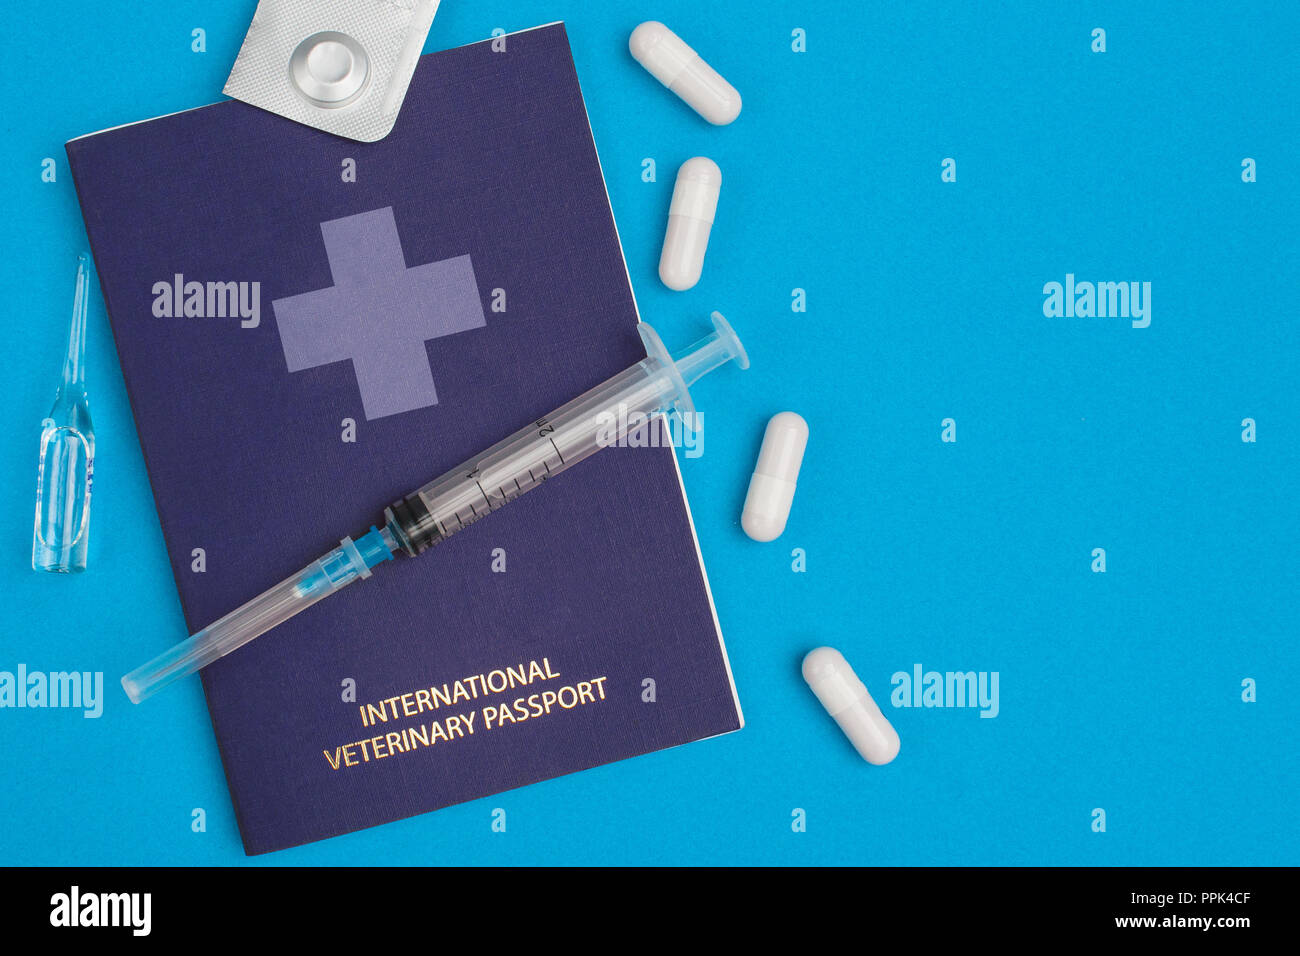 A two-ml syringe lies on a blue veterinary (pet) passport beside which lie four white pills, an ampoule with liquid and a tablet in a package on a blu Stock Photo